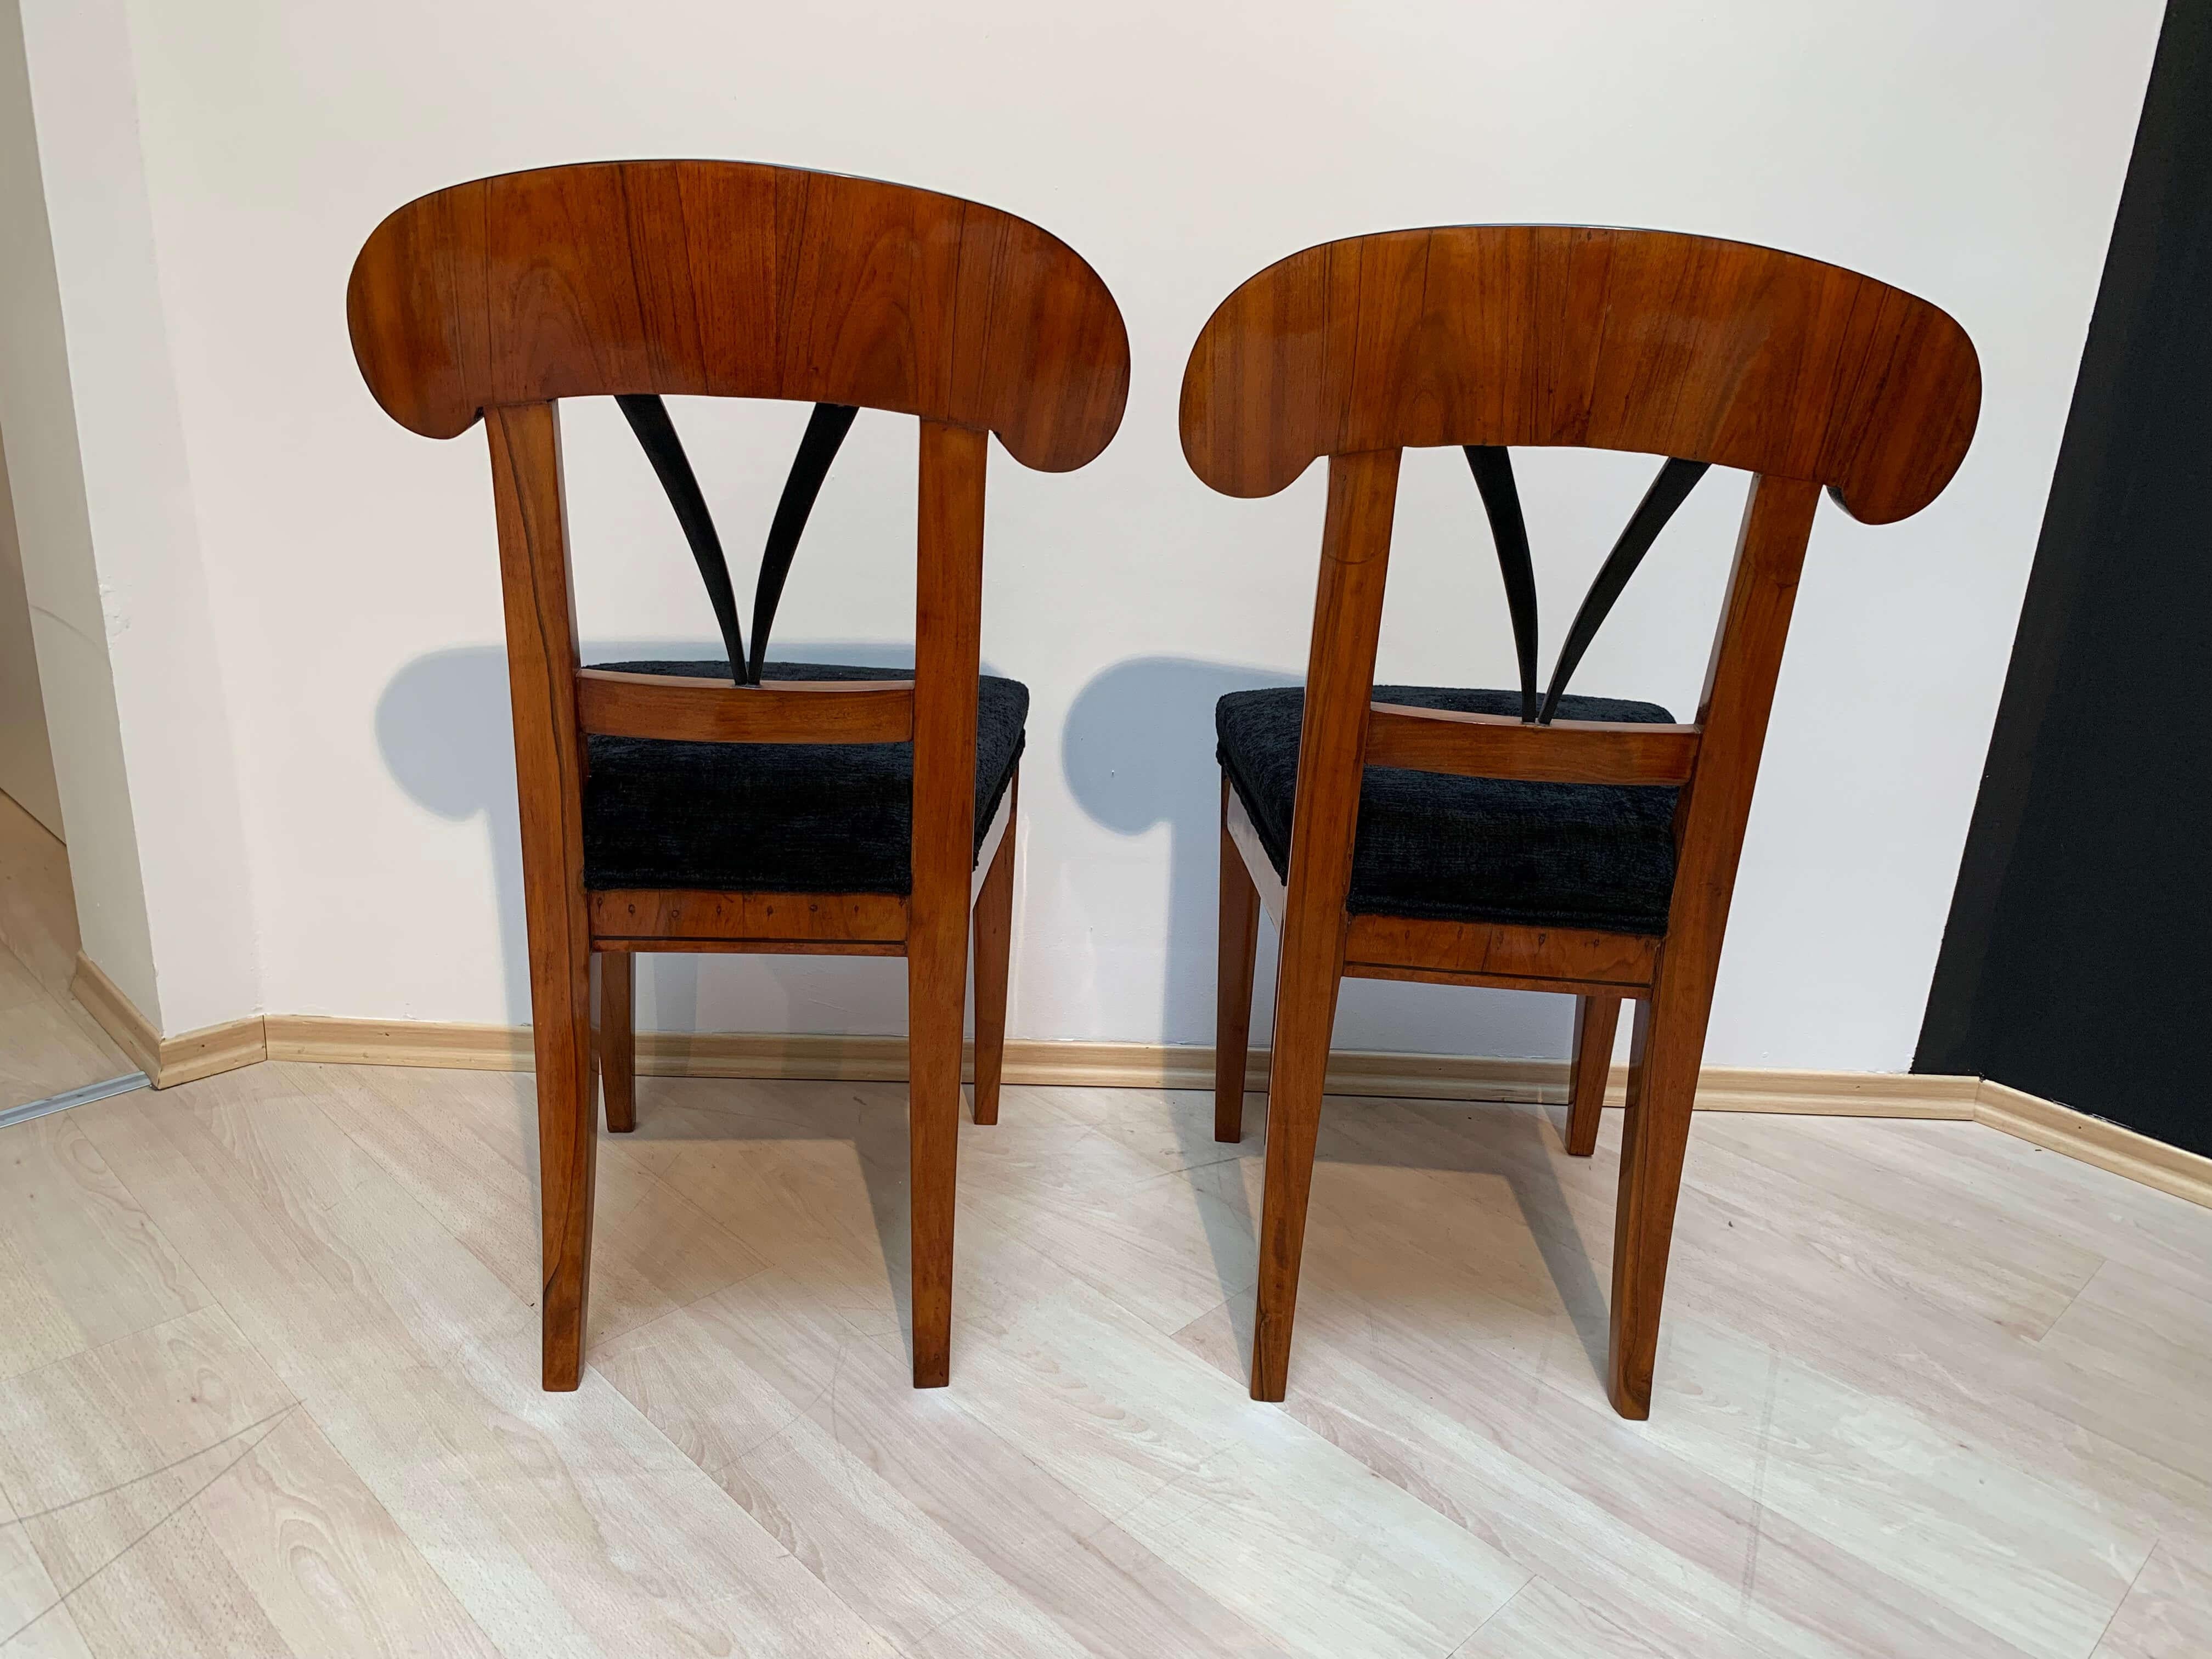 Pair of Biedermeier Shovel Chairs with Ink Painting, Walnut, South German, 1830s For Sale 1